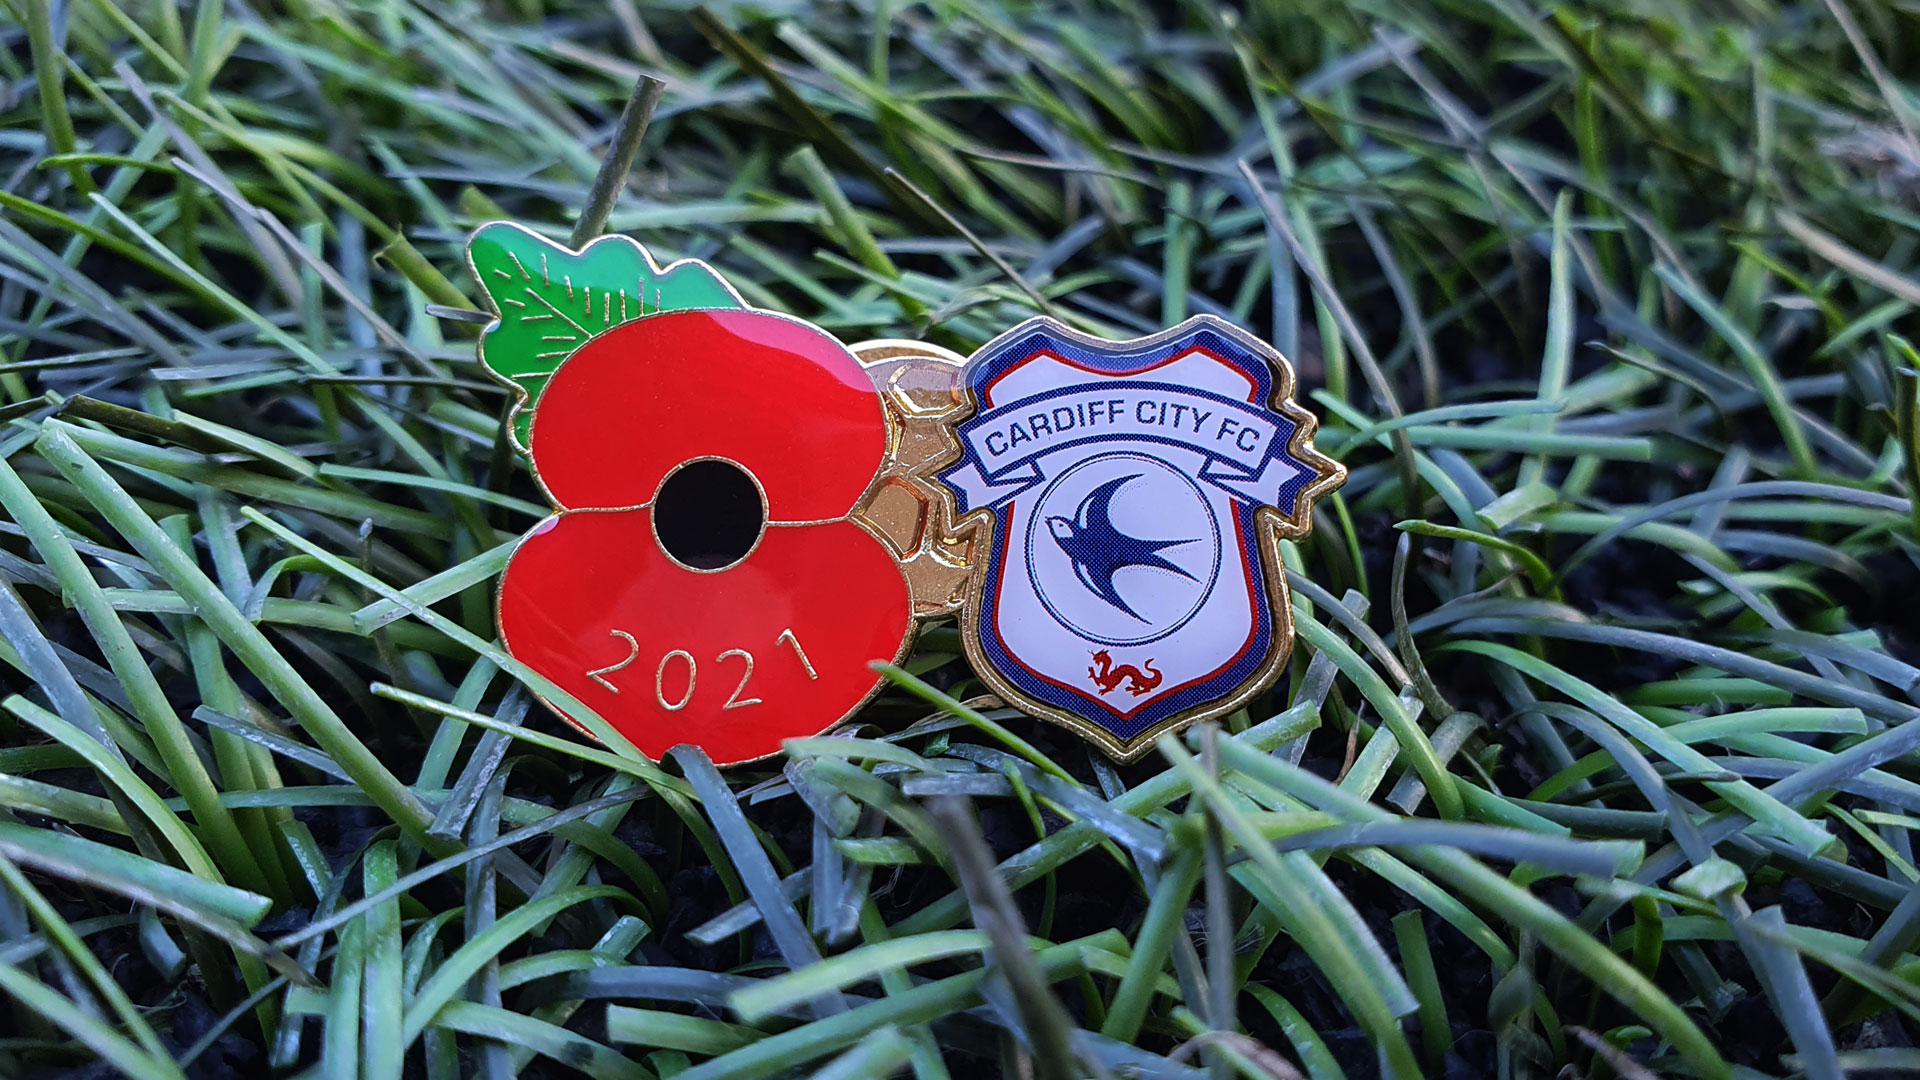 Poppy Appeal badges now available...